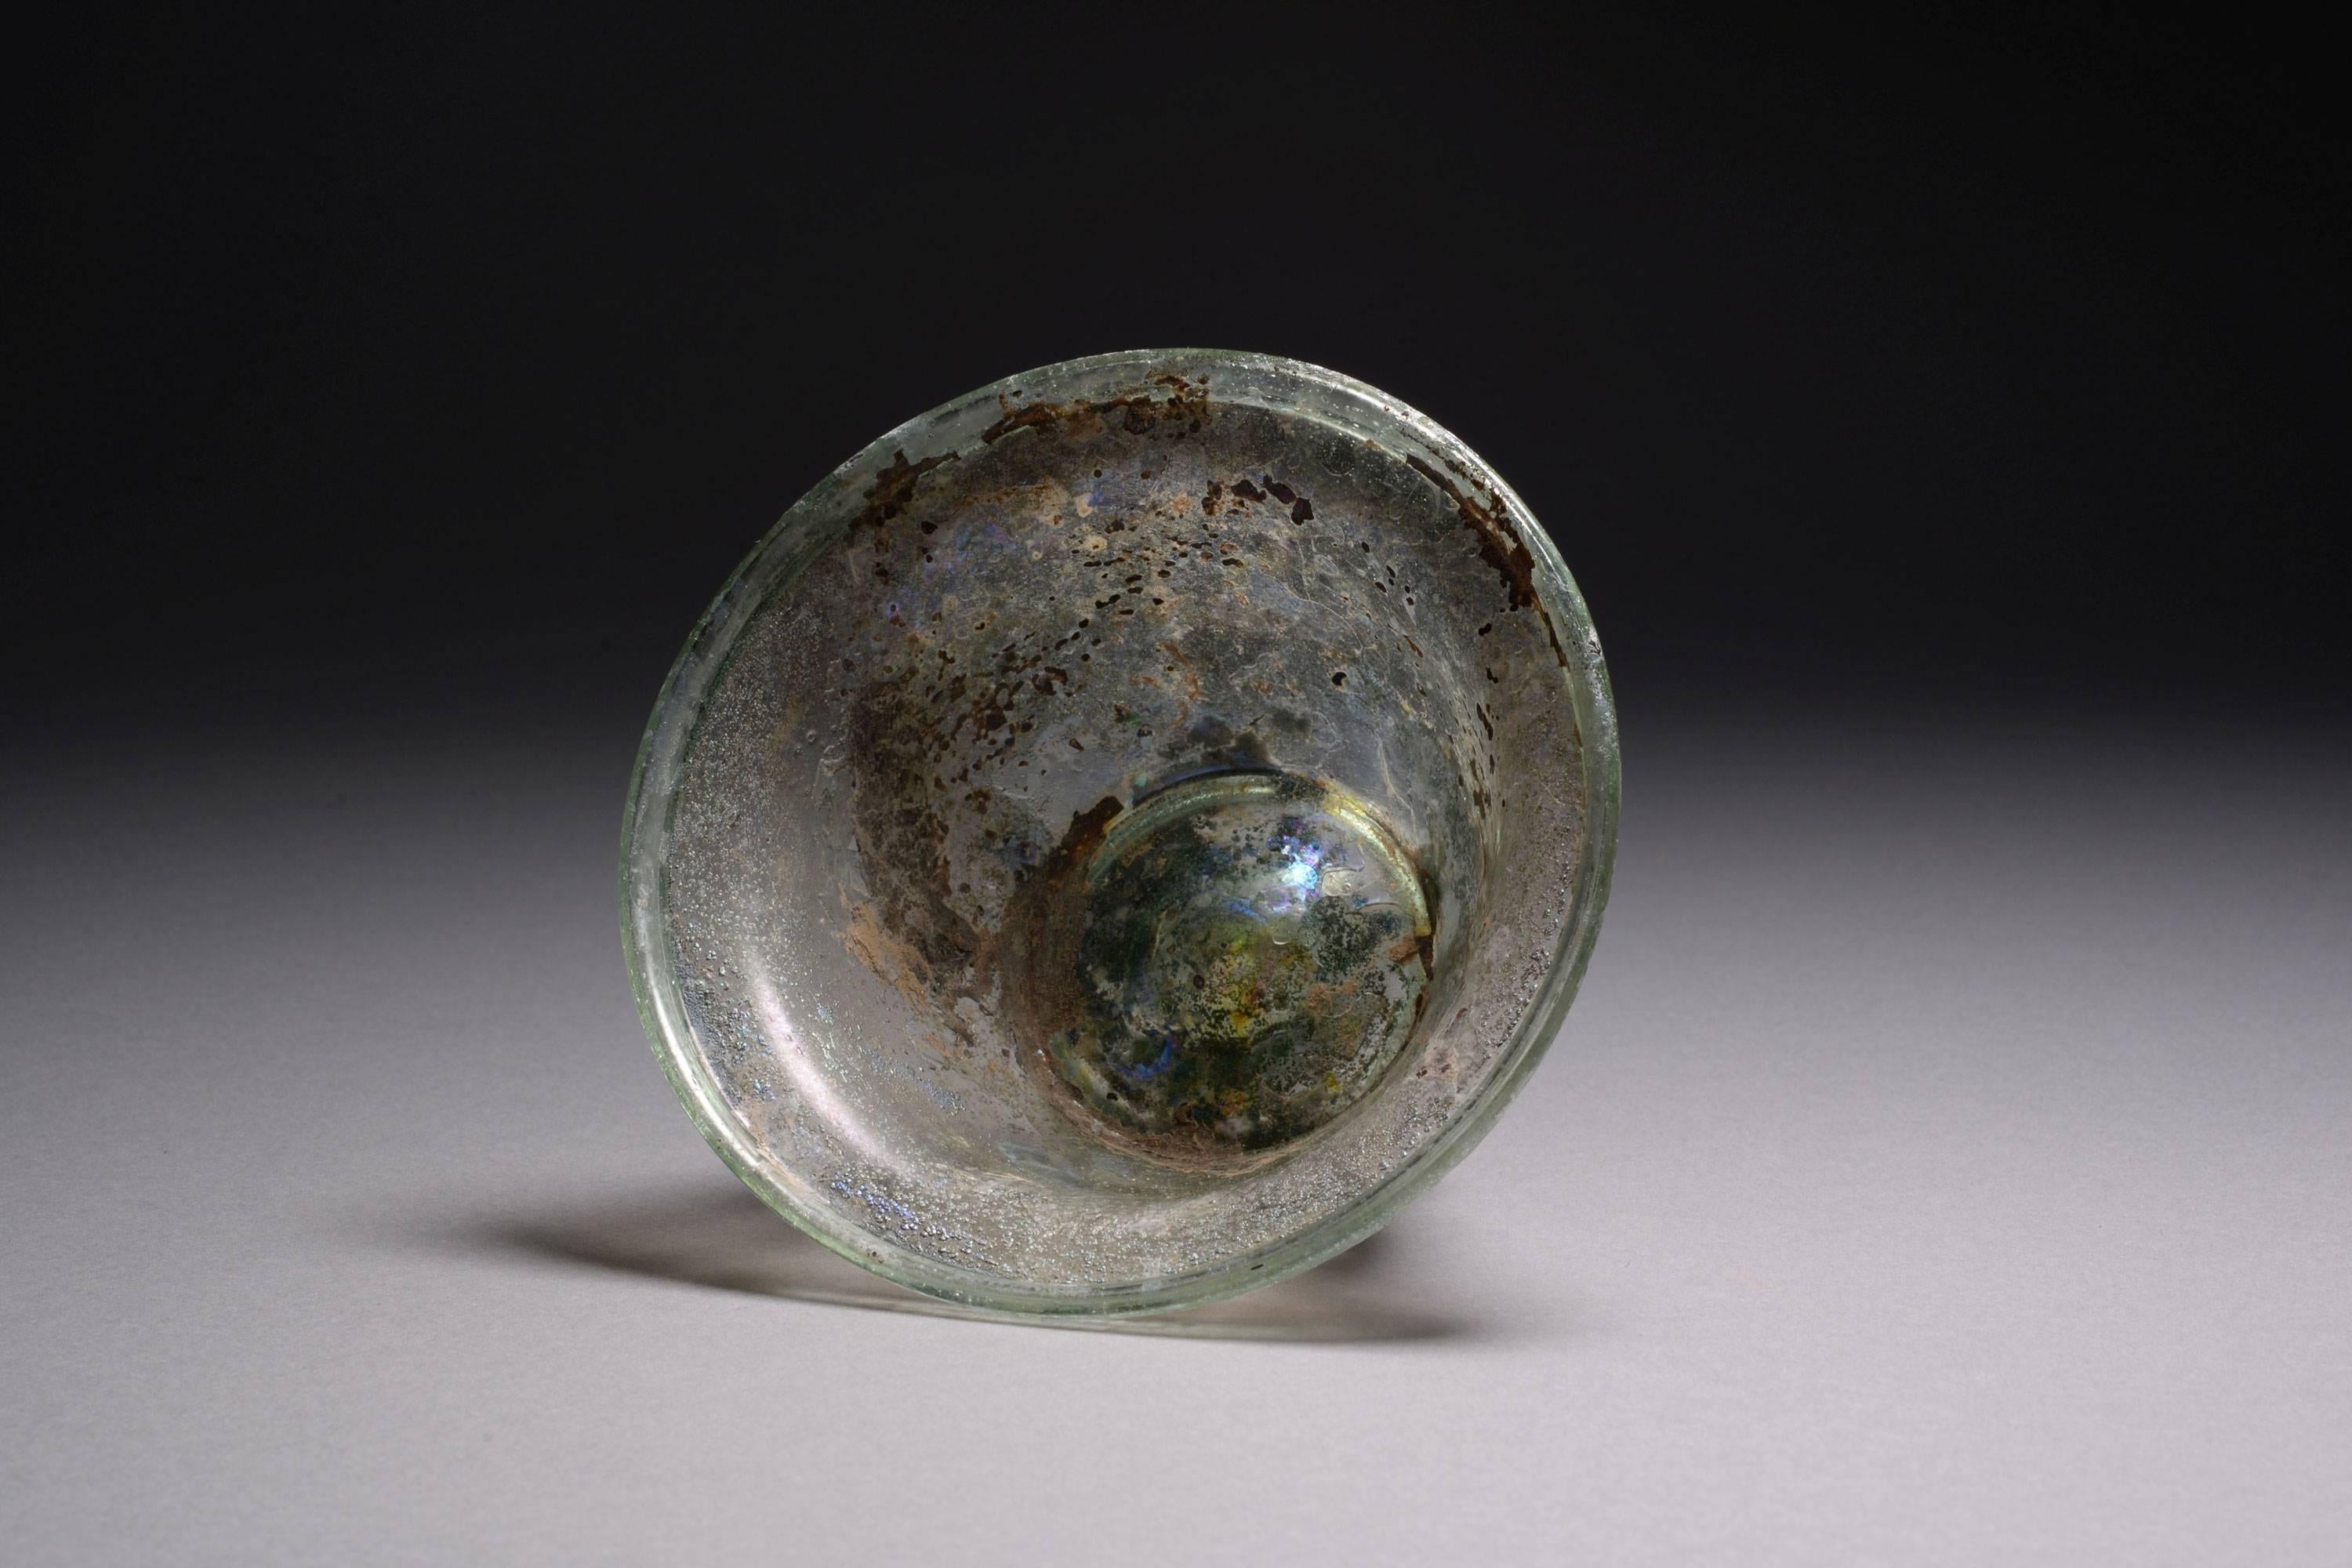 18th Century and Earlier Ancient Roman Glass Patella Cup, 100 AD